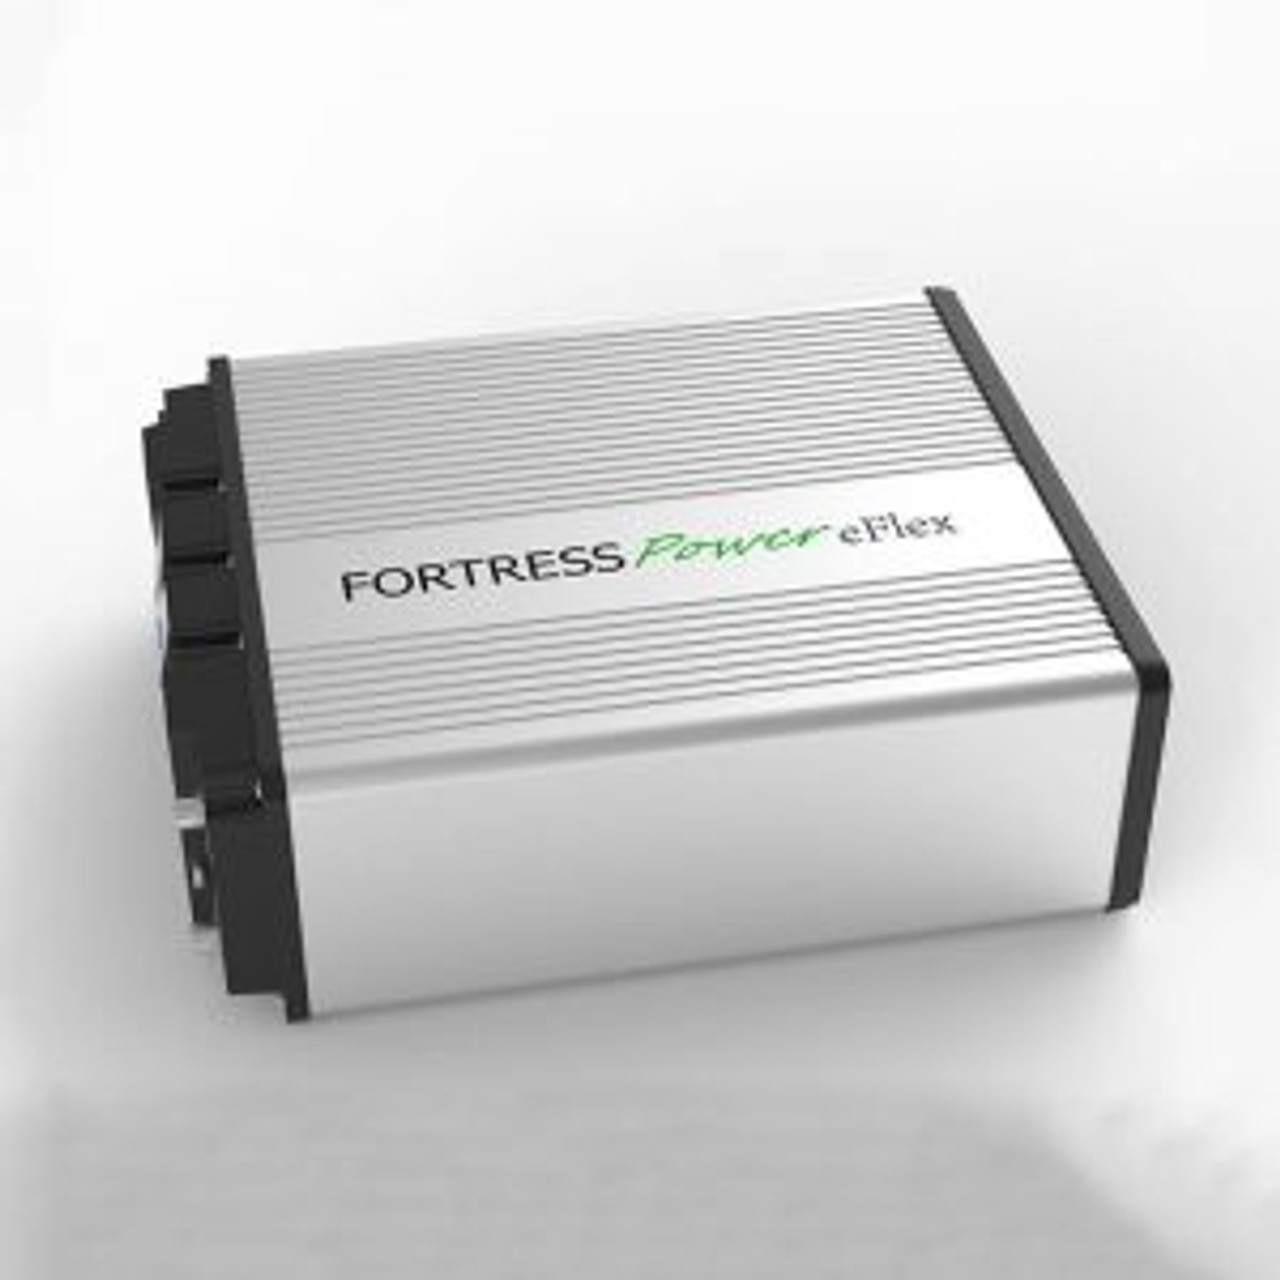 18.5 kWh Fortress eVault Lithium Battery 48V